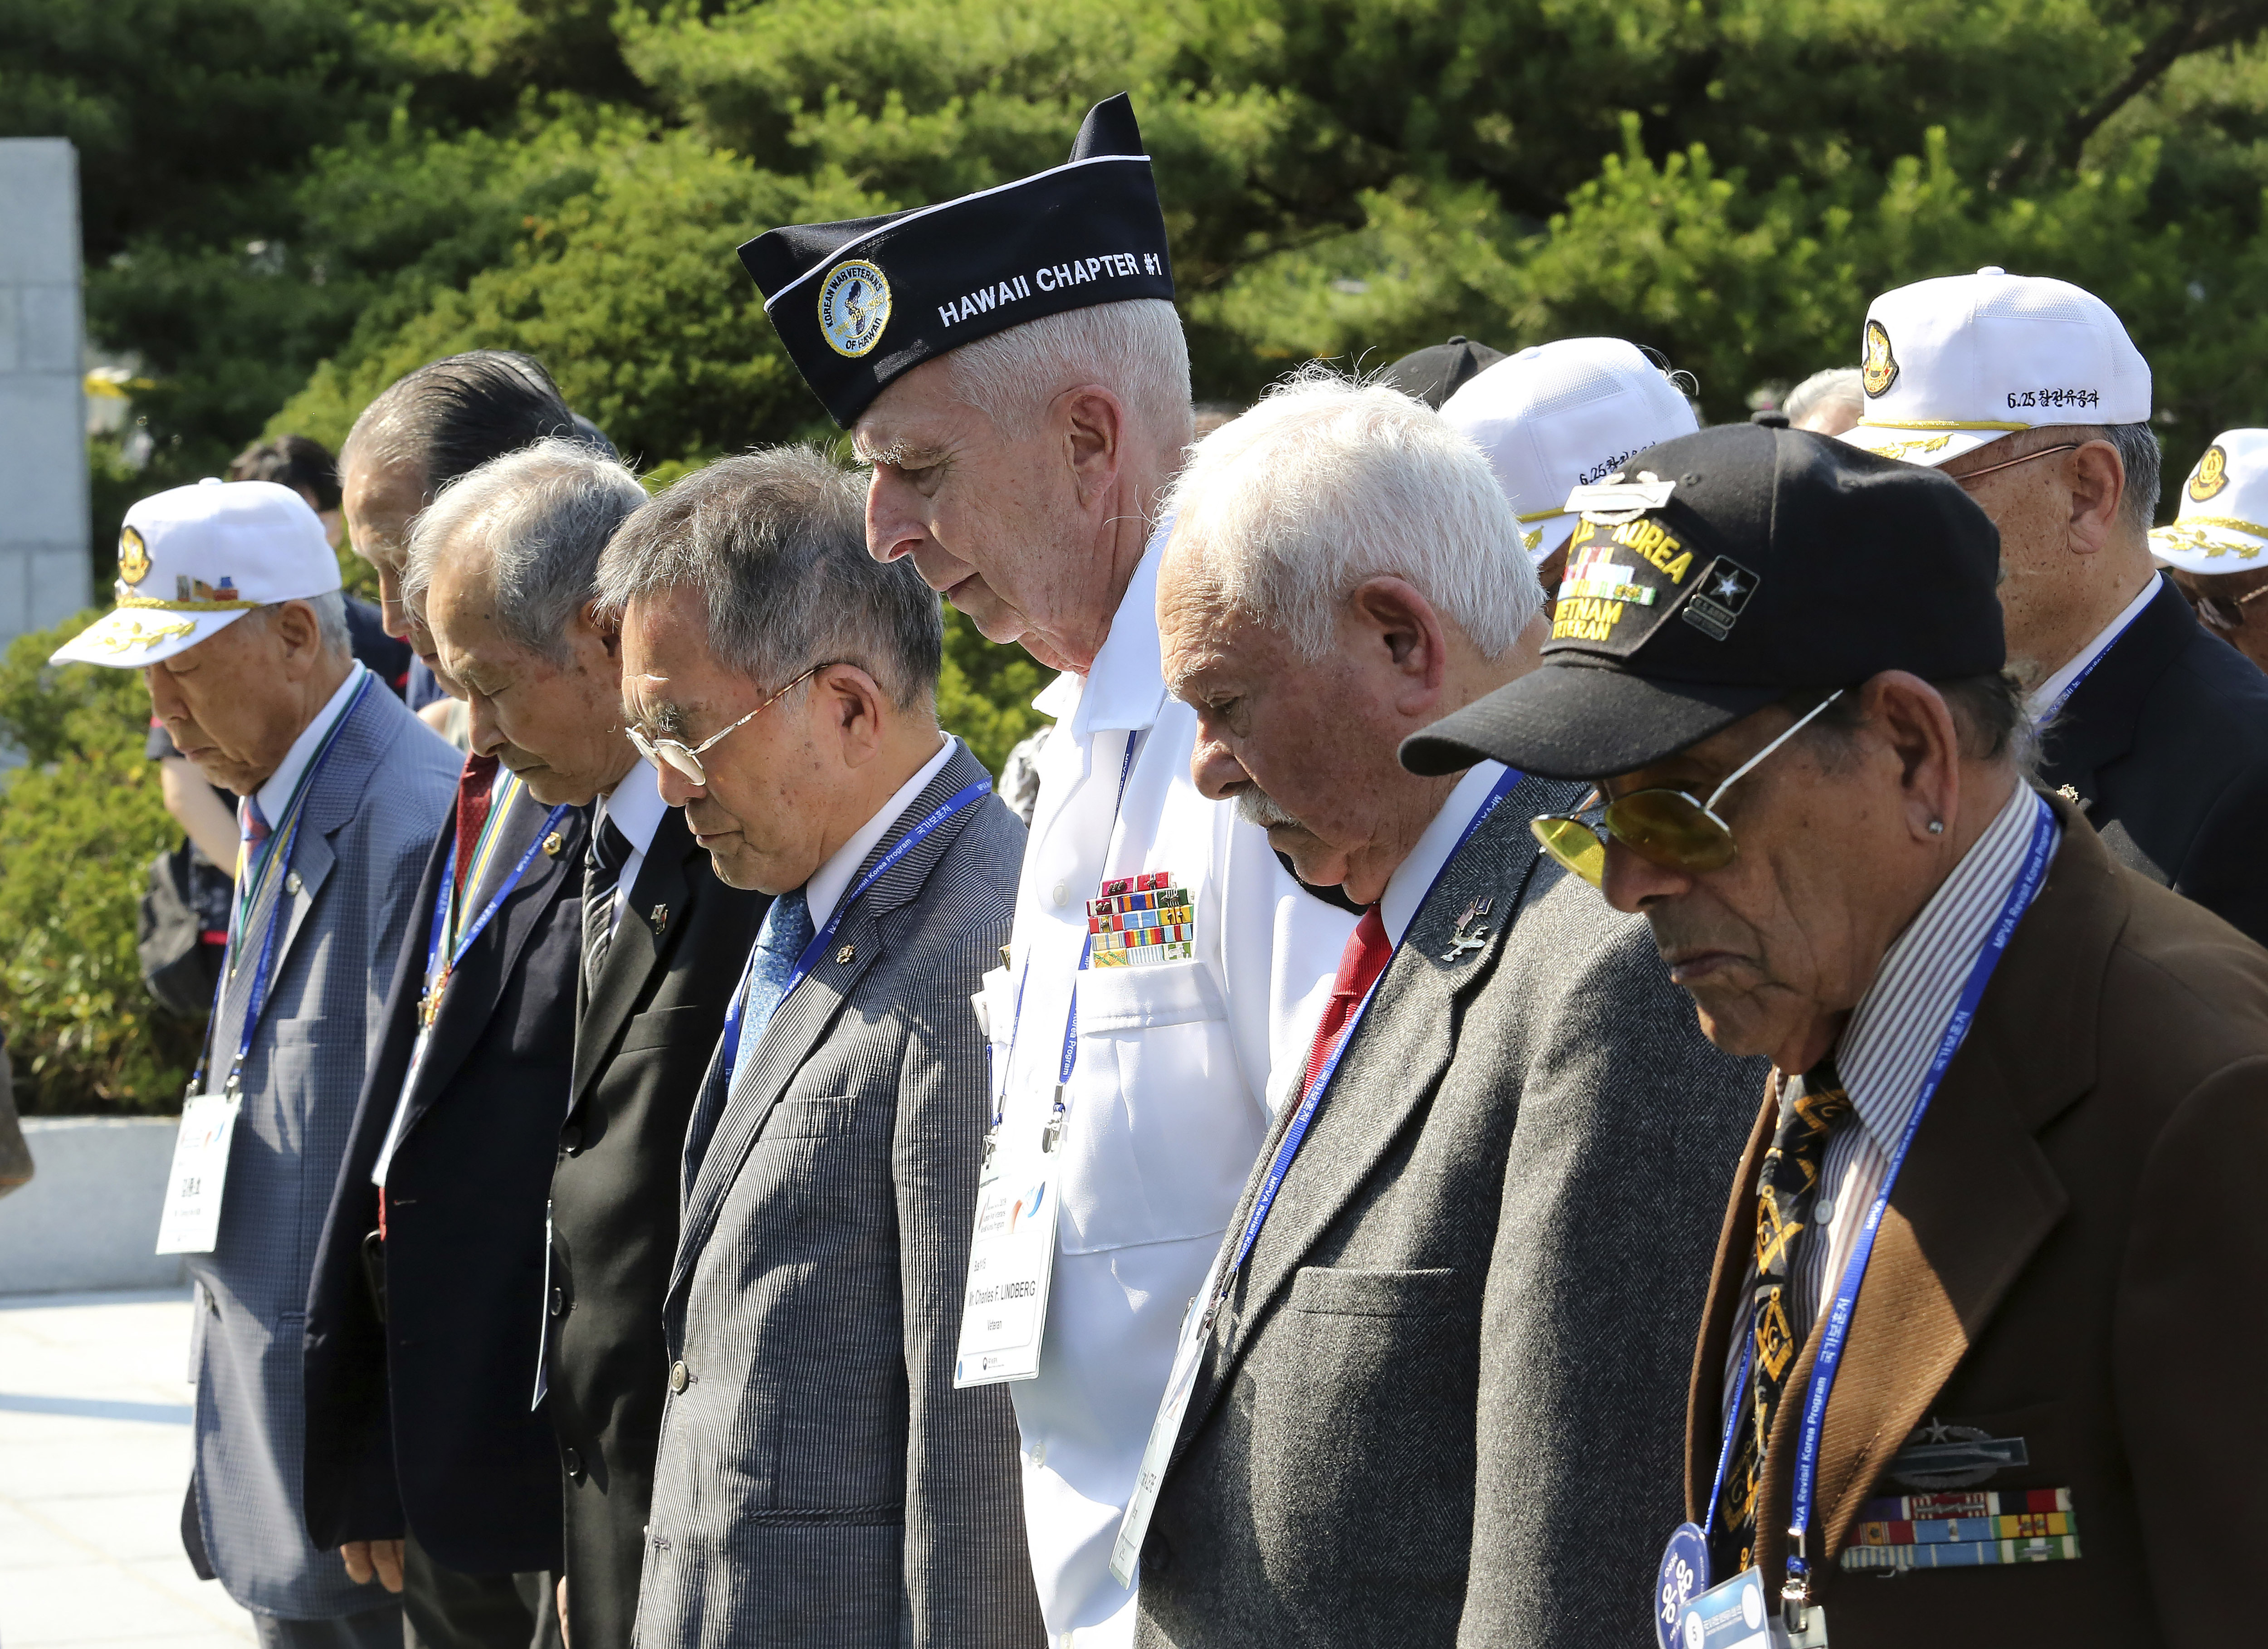 South Korean and U.S. veterans of the Korean War pay their respects to the war dead on the eve of the 69th anniversary of the outbreak of the Korean War at the National Cemetery in Seoul, South Korea, Monday, June 24, 2019. 62 U.S. war veterans and their families, along with 20 Korean veterans and their families residing overseas, arrived on Sunday, June 23, here for a six-day visit to mark the anniversary. (AP Photo/Ahn Young-joon)